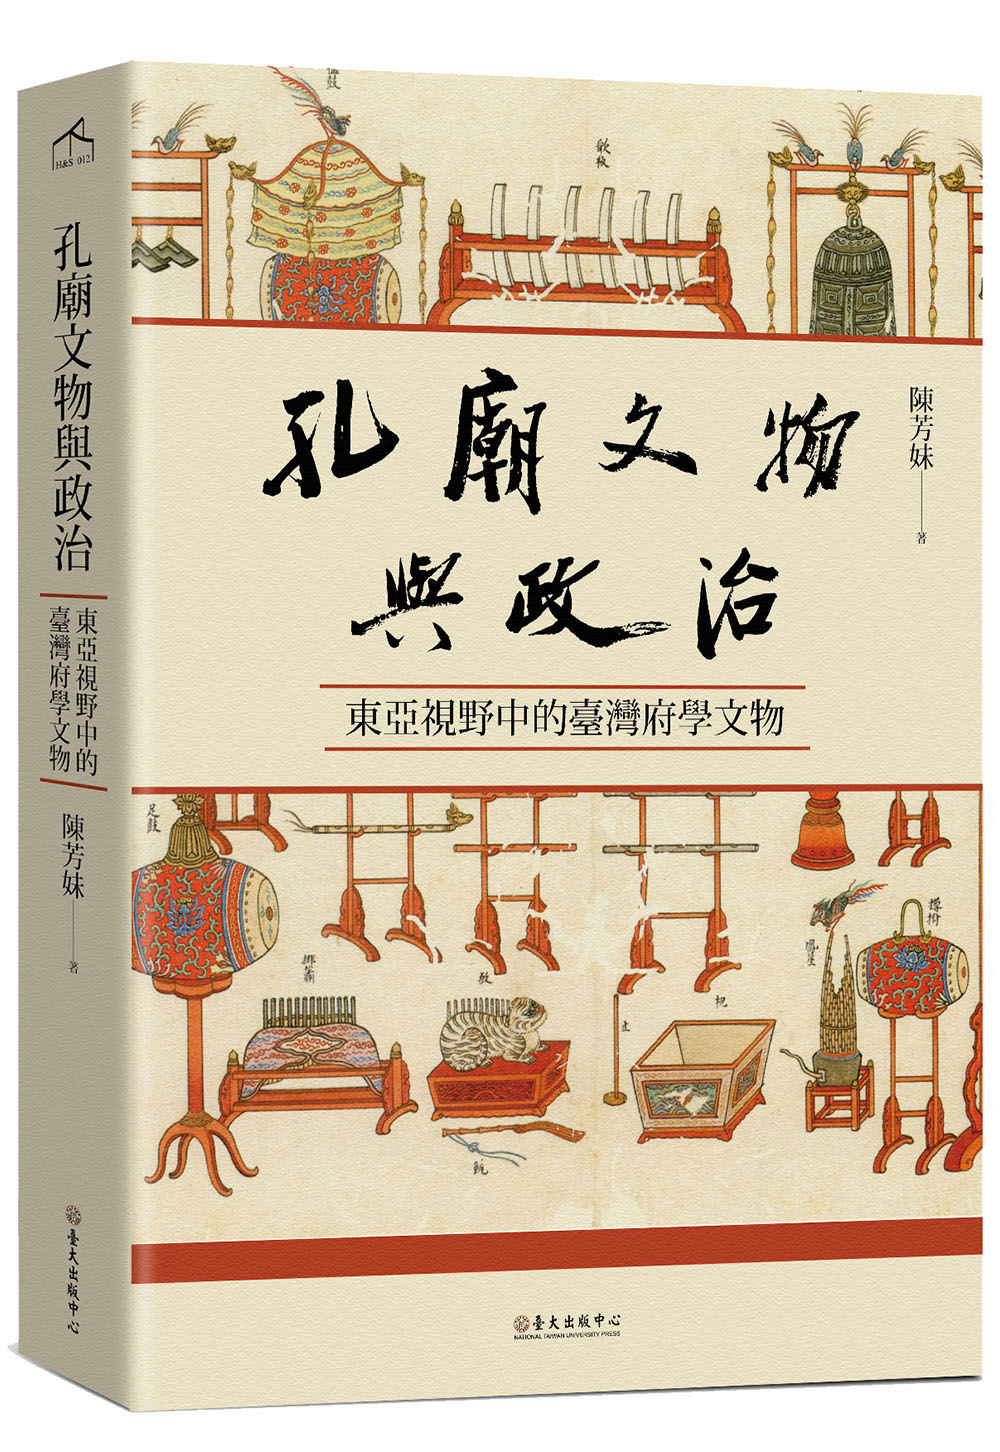 Politics and the Cultural Relics of the Confucius Temples: Taiwan Confucius Temple in the Eyes of East Asia